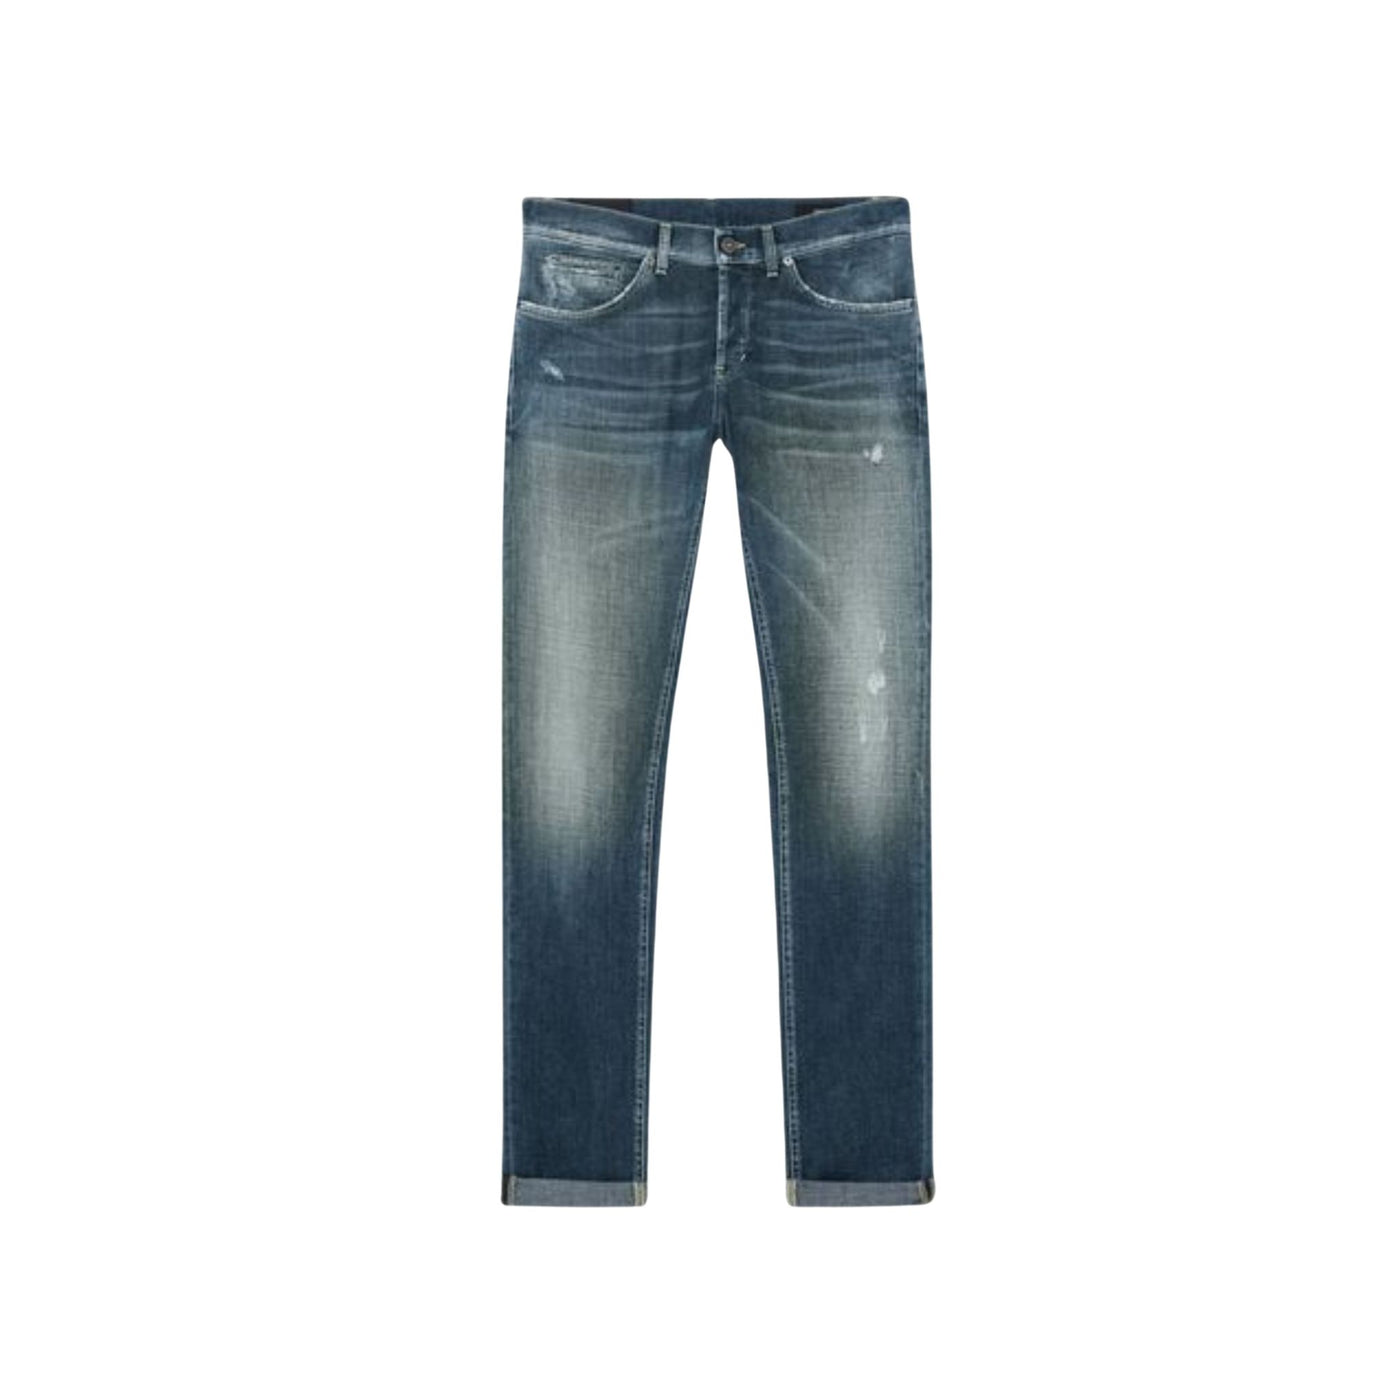 Regular men's jeans with rips